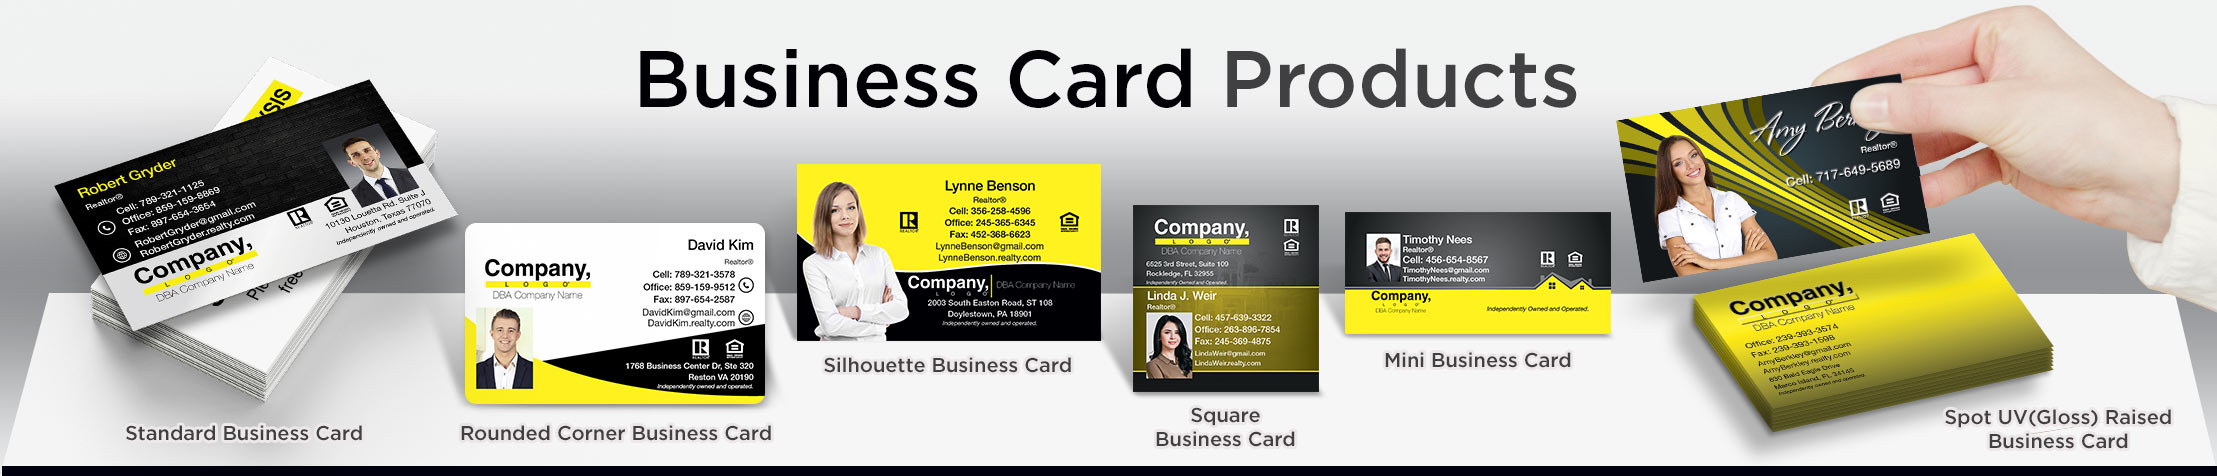 Weichert Real Estate Business Card Products - Weichert  - Unique, Custom Business Cards Printed on Quality Stock with Creative Designs for Realtors | BestPrintBuy.com